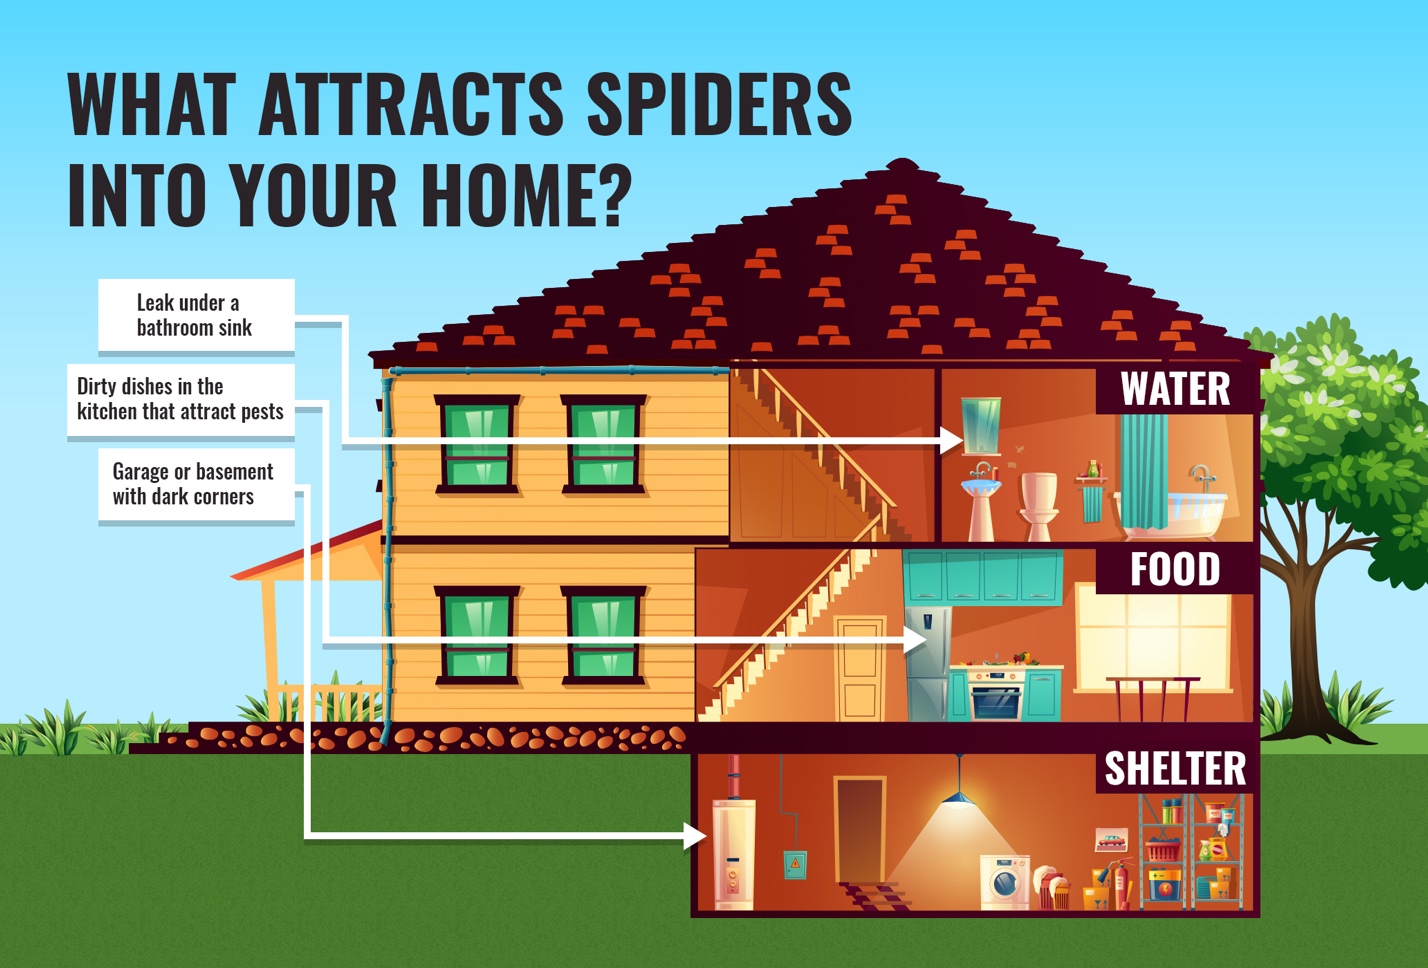 Depiction of House and what attracts spiders